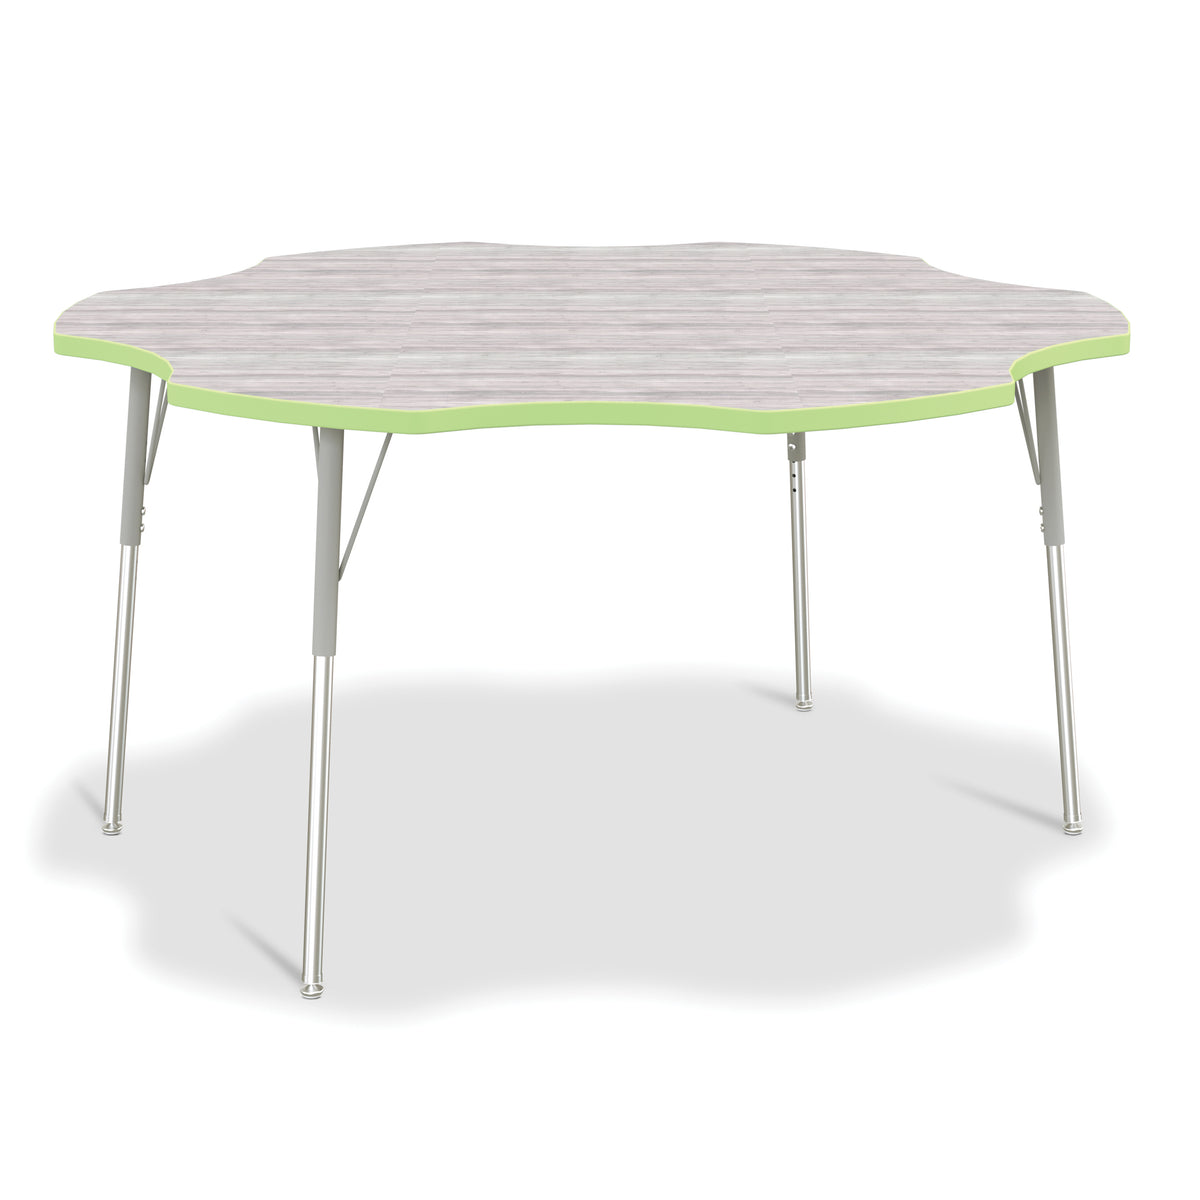 6458JCA451, Berries Six Leaf Activity Table - A-height - Driftwood Gray/Key Lime/Gray